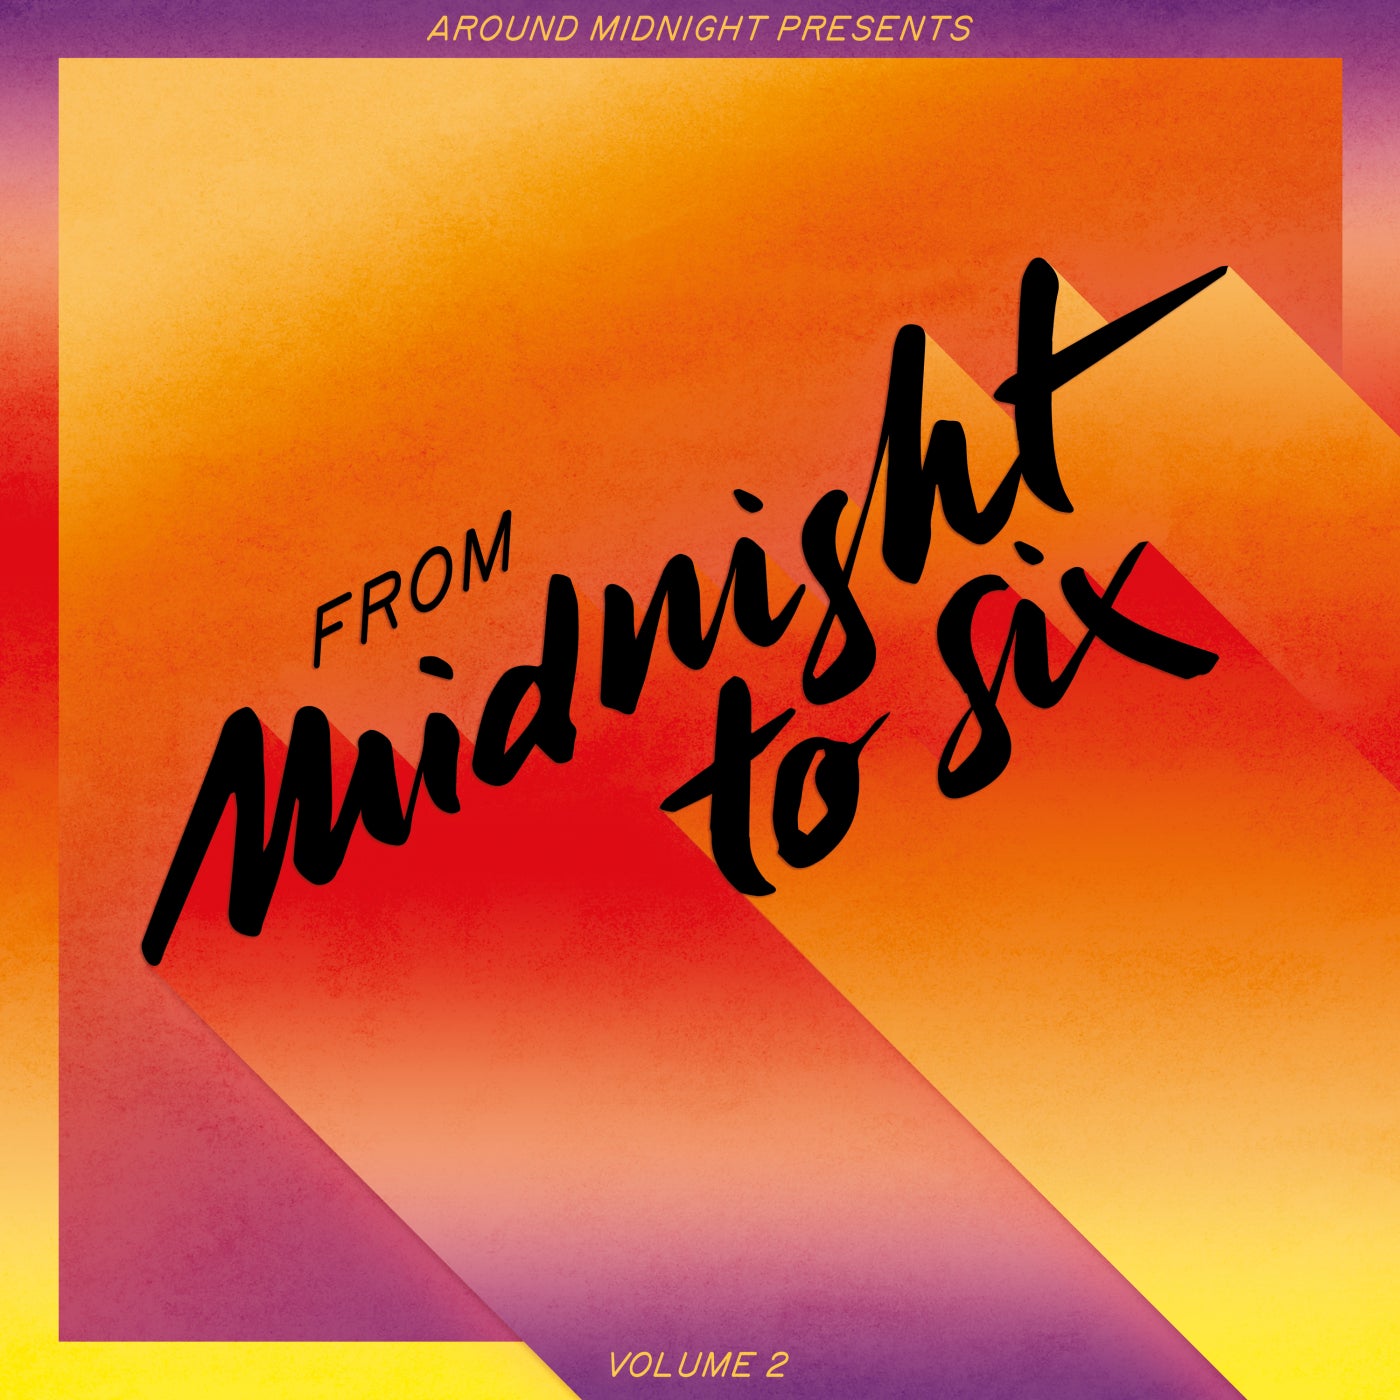 From Midnight to Six, Vol. 2